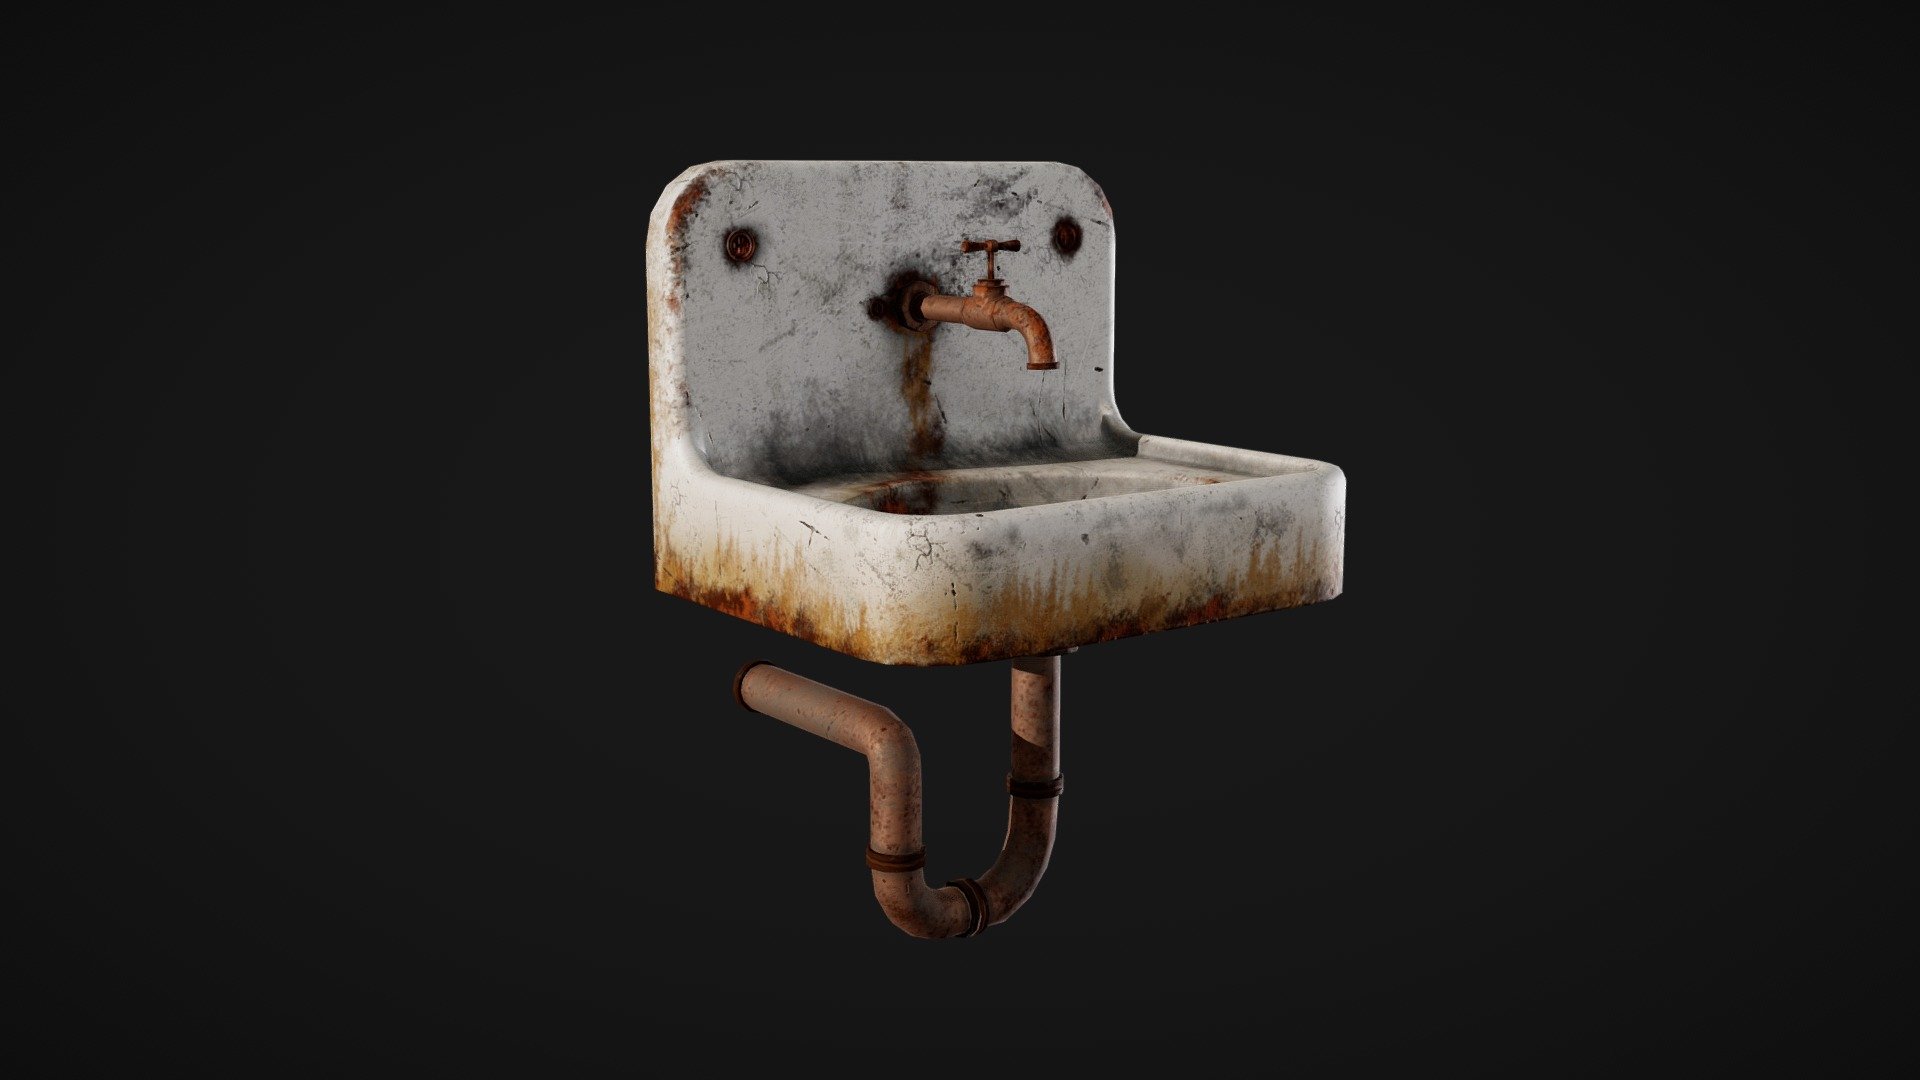 Model for game prepared in Blender and textured in Substance Painter.

Triangles: 2349
Vertices: 1217 - Old sink - 3D model by rendto 3d model